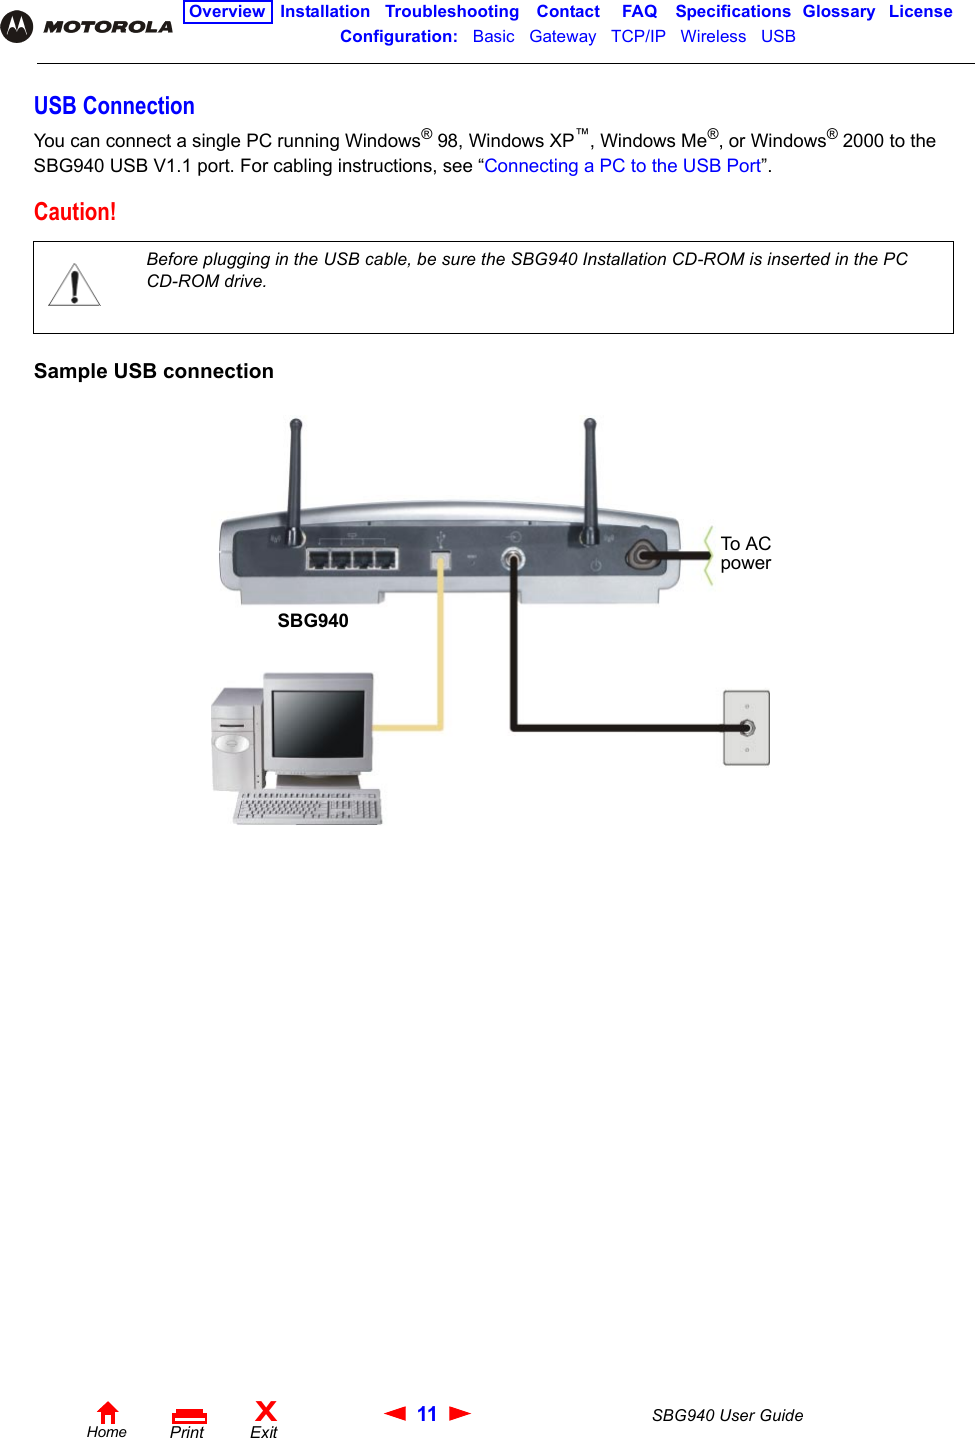 11 SBG940 User GuideHomeXExitPrintOverview Installation Troubleshooting Contact FAQ Specifications Glossary LicenseConfiguration:   Basic   Gateway   TCP/IP   Wireless   USB   USB ConnectionYou can connect a single PC running Windows®98, Windows XP™, Windows Me®, or Windows®2000 to the SBG940 USB V1.1 port. For cabling instructions, see “Connecting a PC to the USB Port”. Sample USB connectionCaution!Before plugging in the USB cable, be sure the SBG940 Installation CD-ROM is inserted in the PC CD-ROM drive. SBG940To A C power